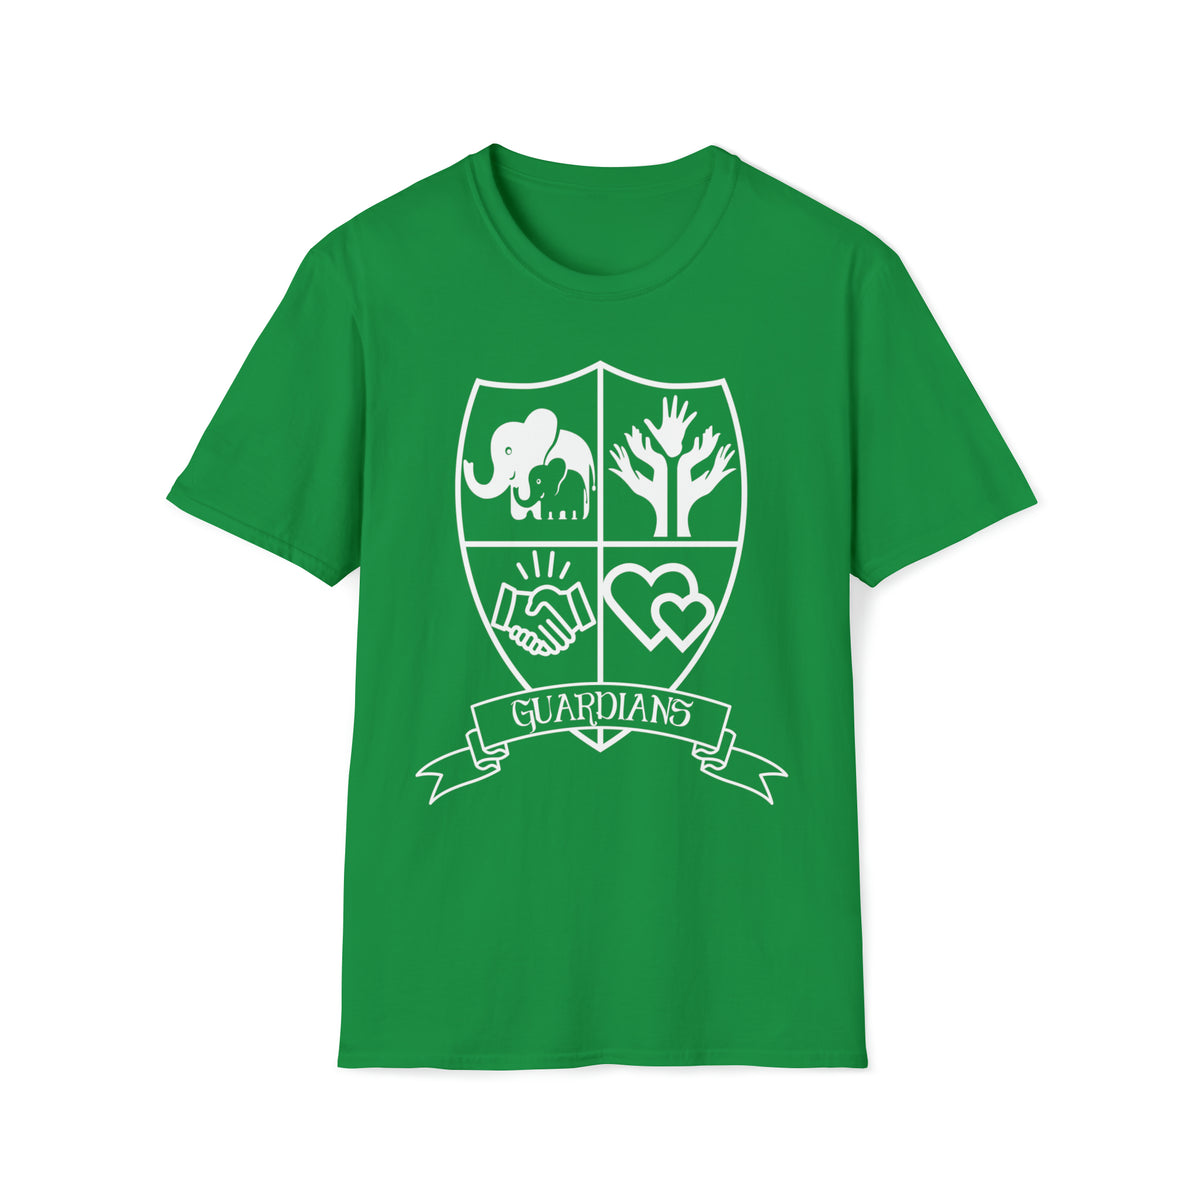 Sonoma Elementary Guardians House Adult T-Shirt